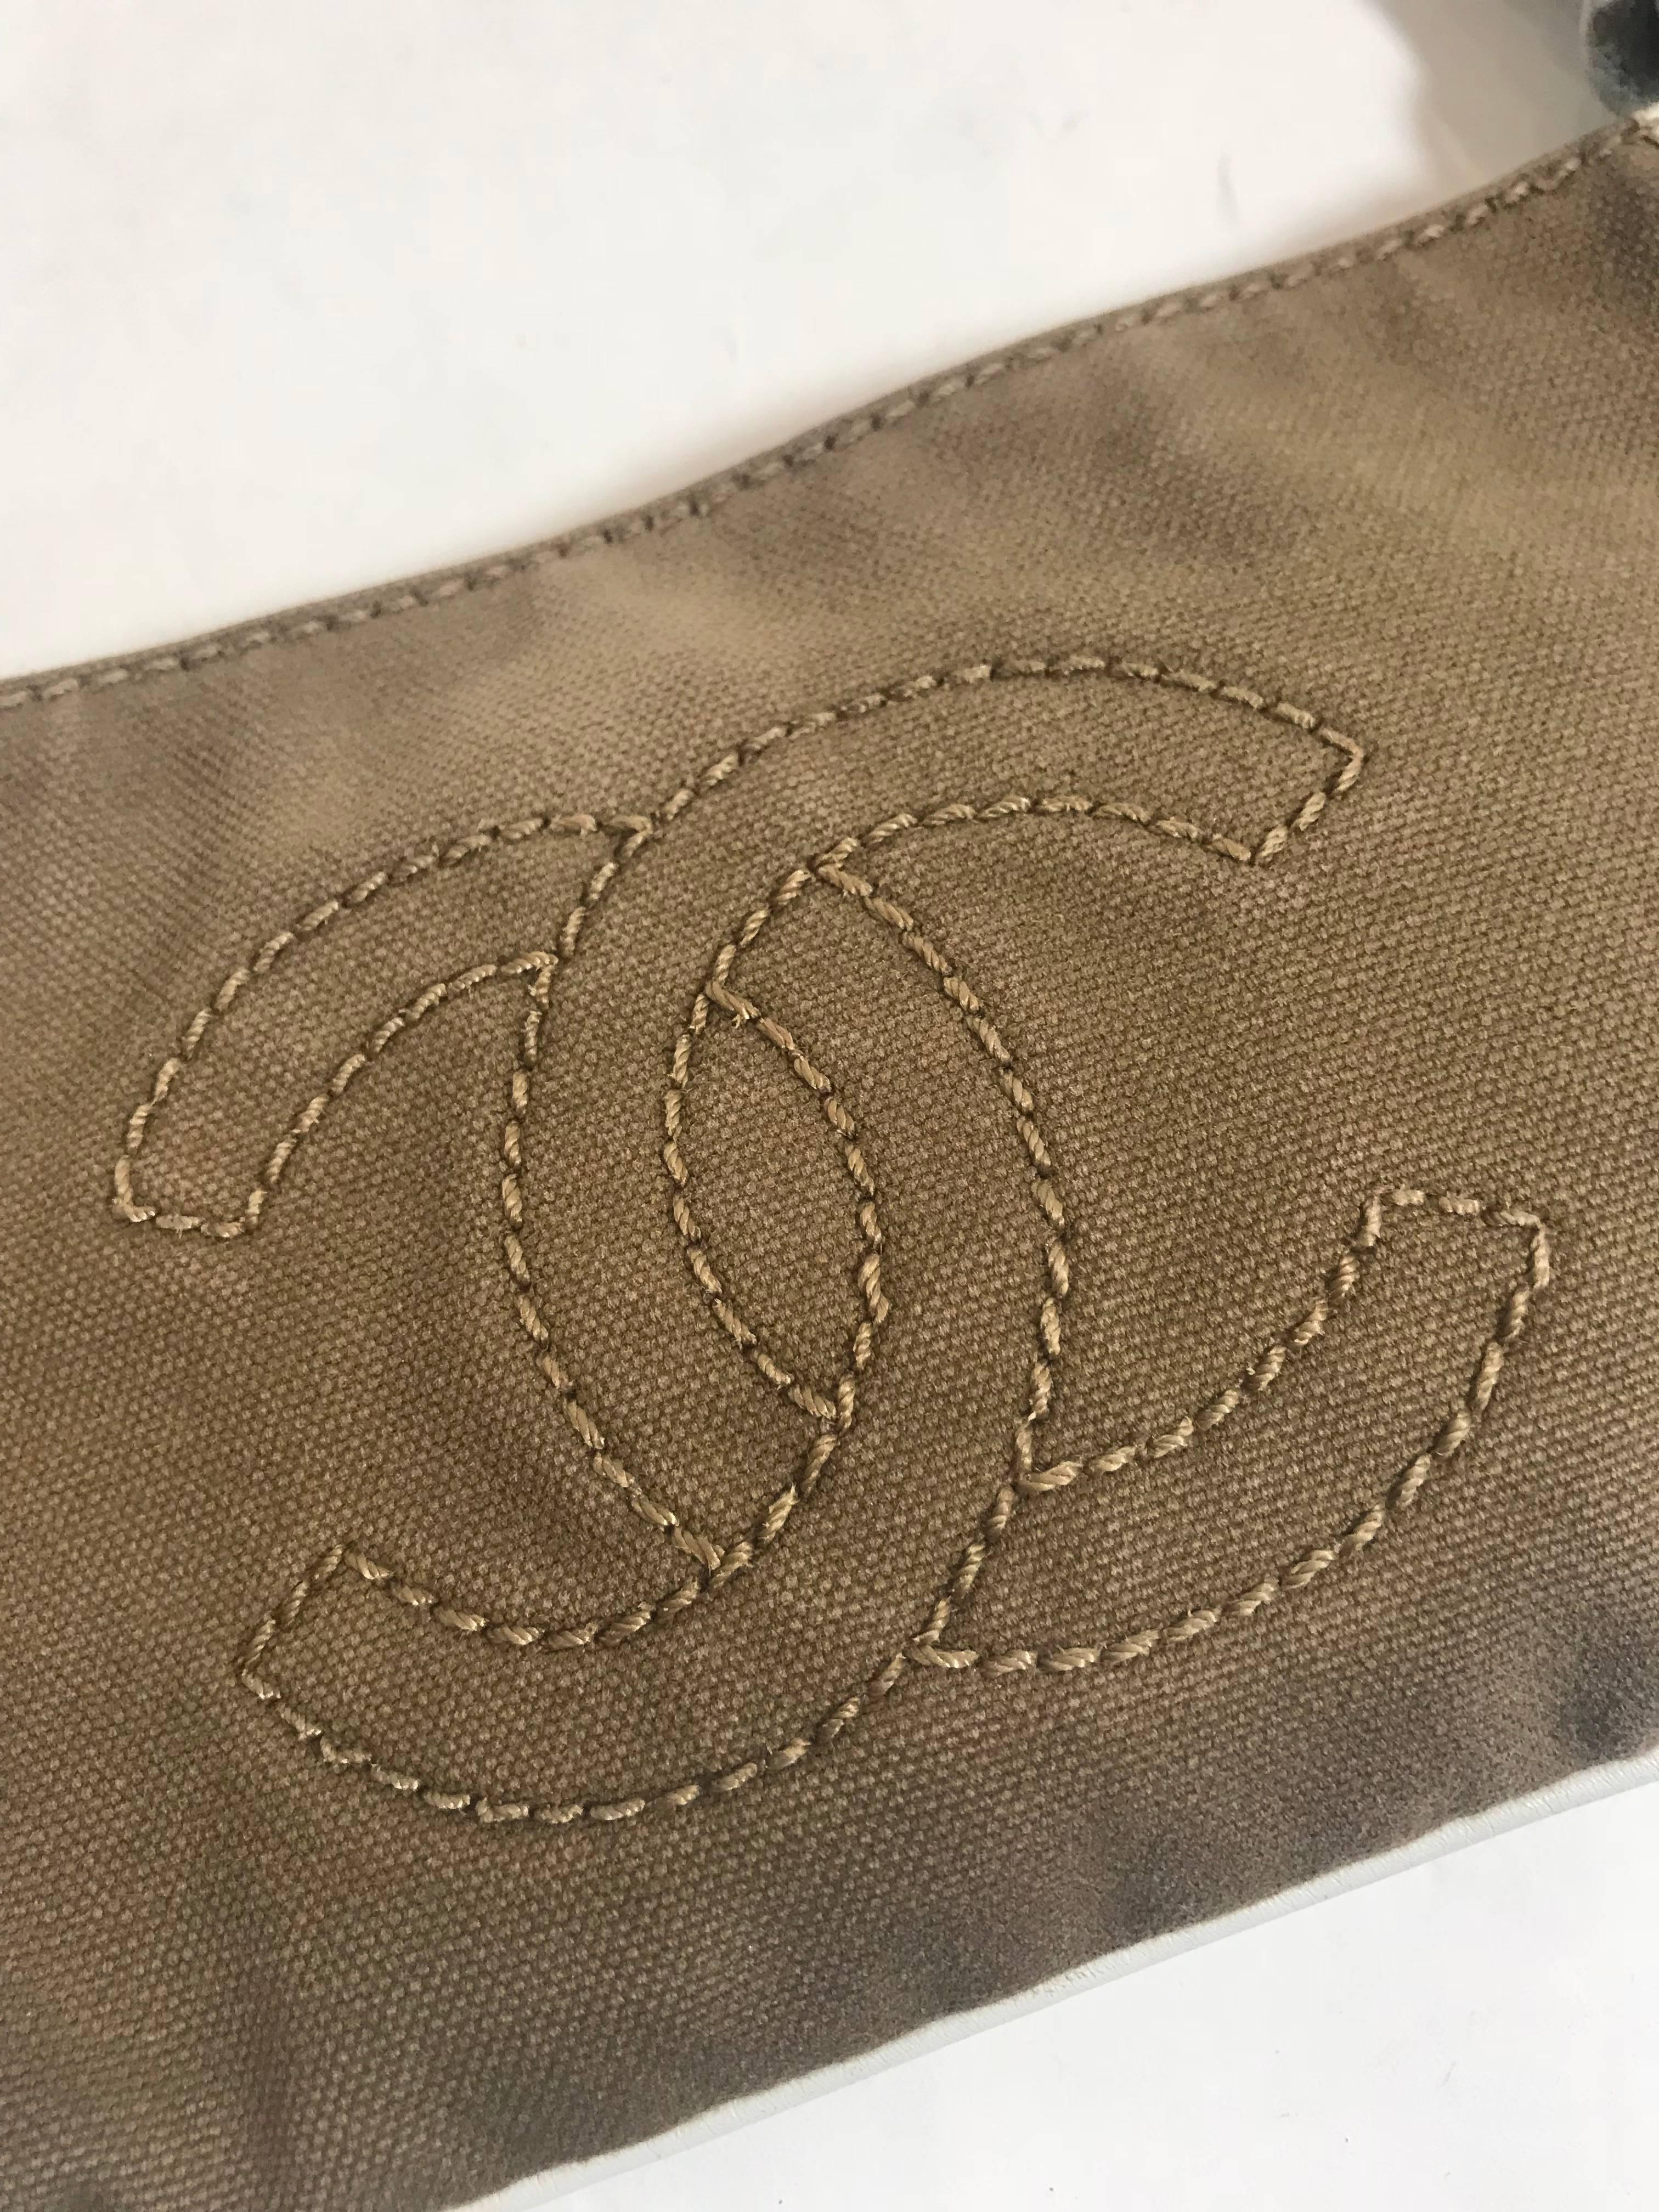 Chanel Cotton X White Leather Brown Canvas Hobo Bag In Excellent Condition For Sale In Roslyn, NY